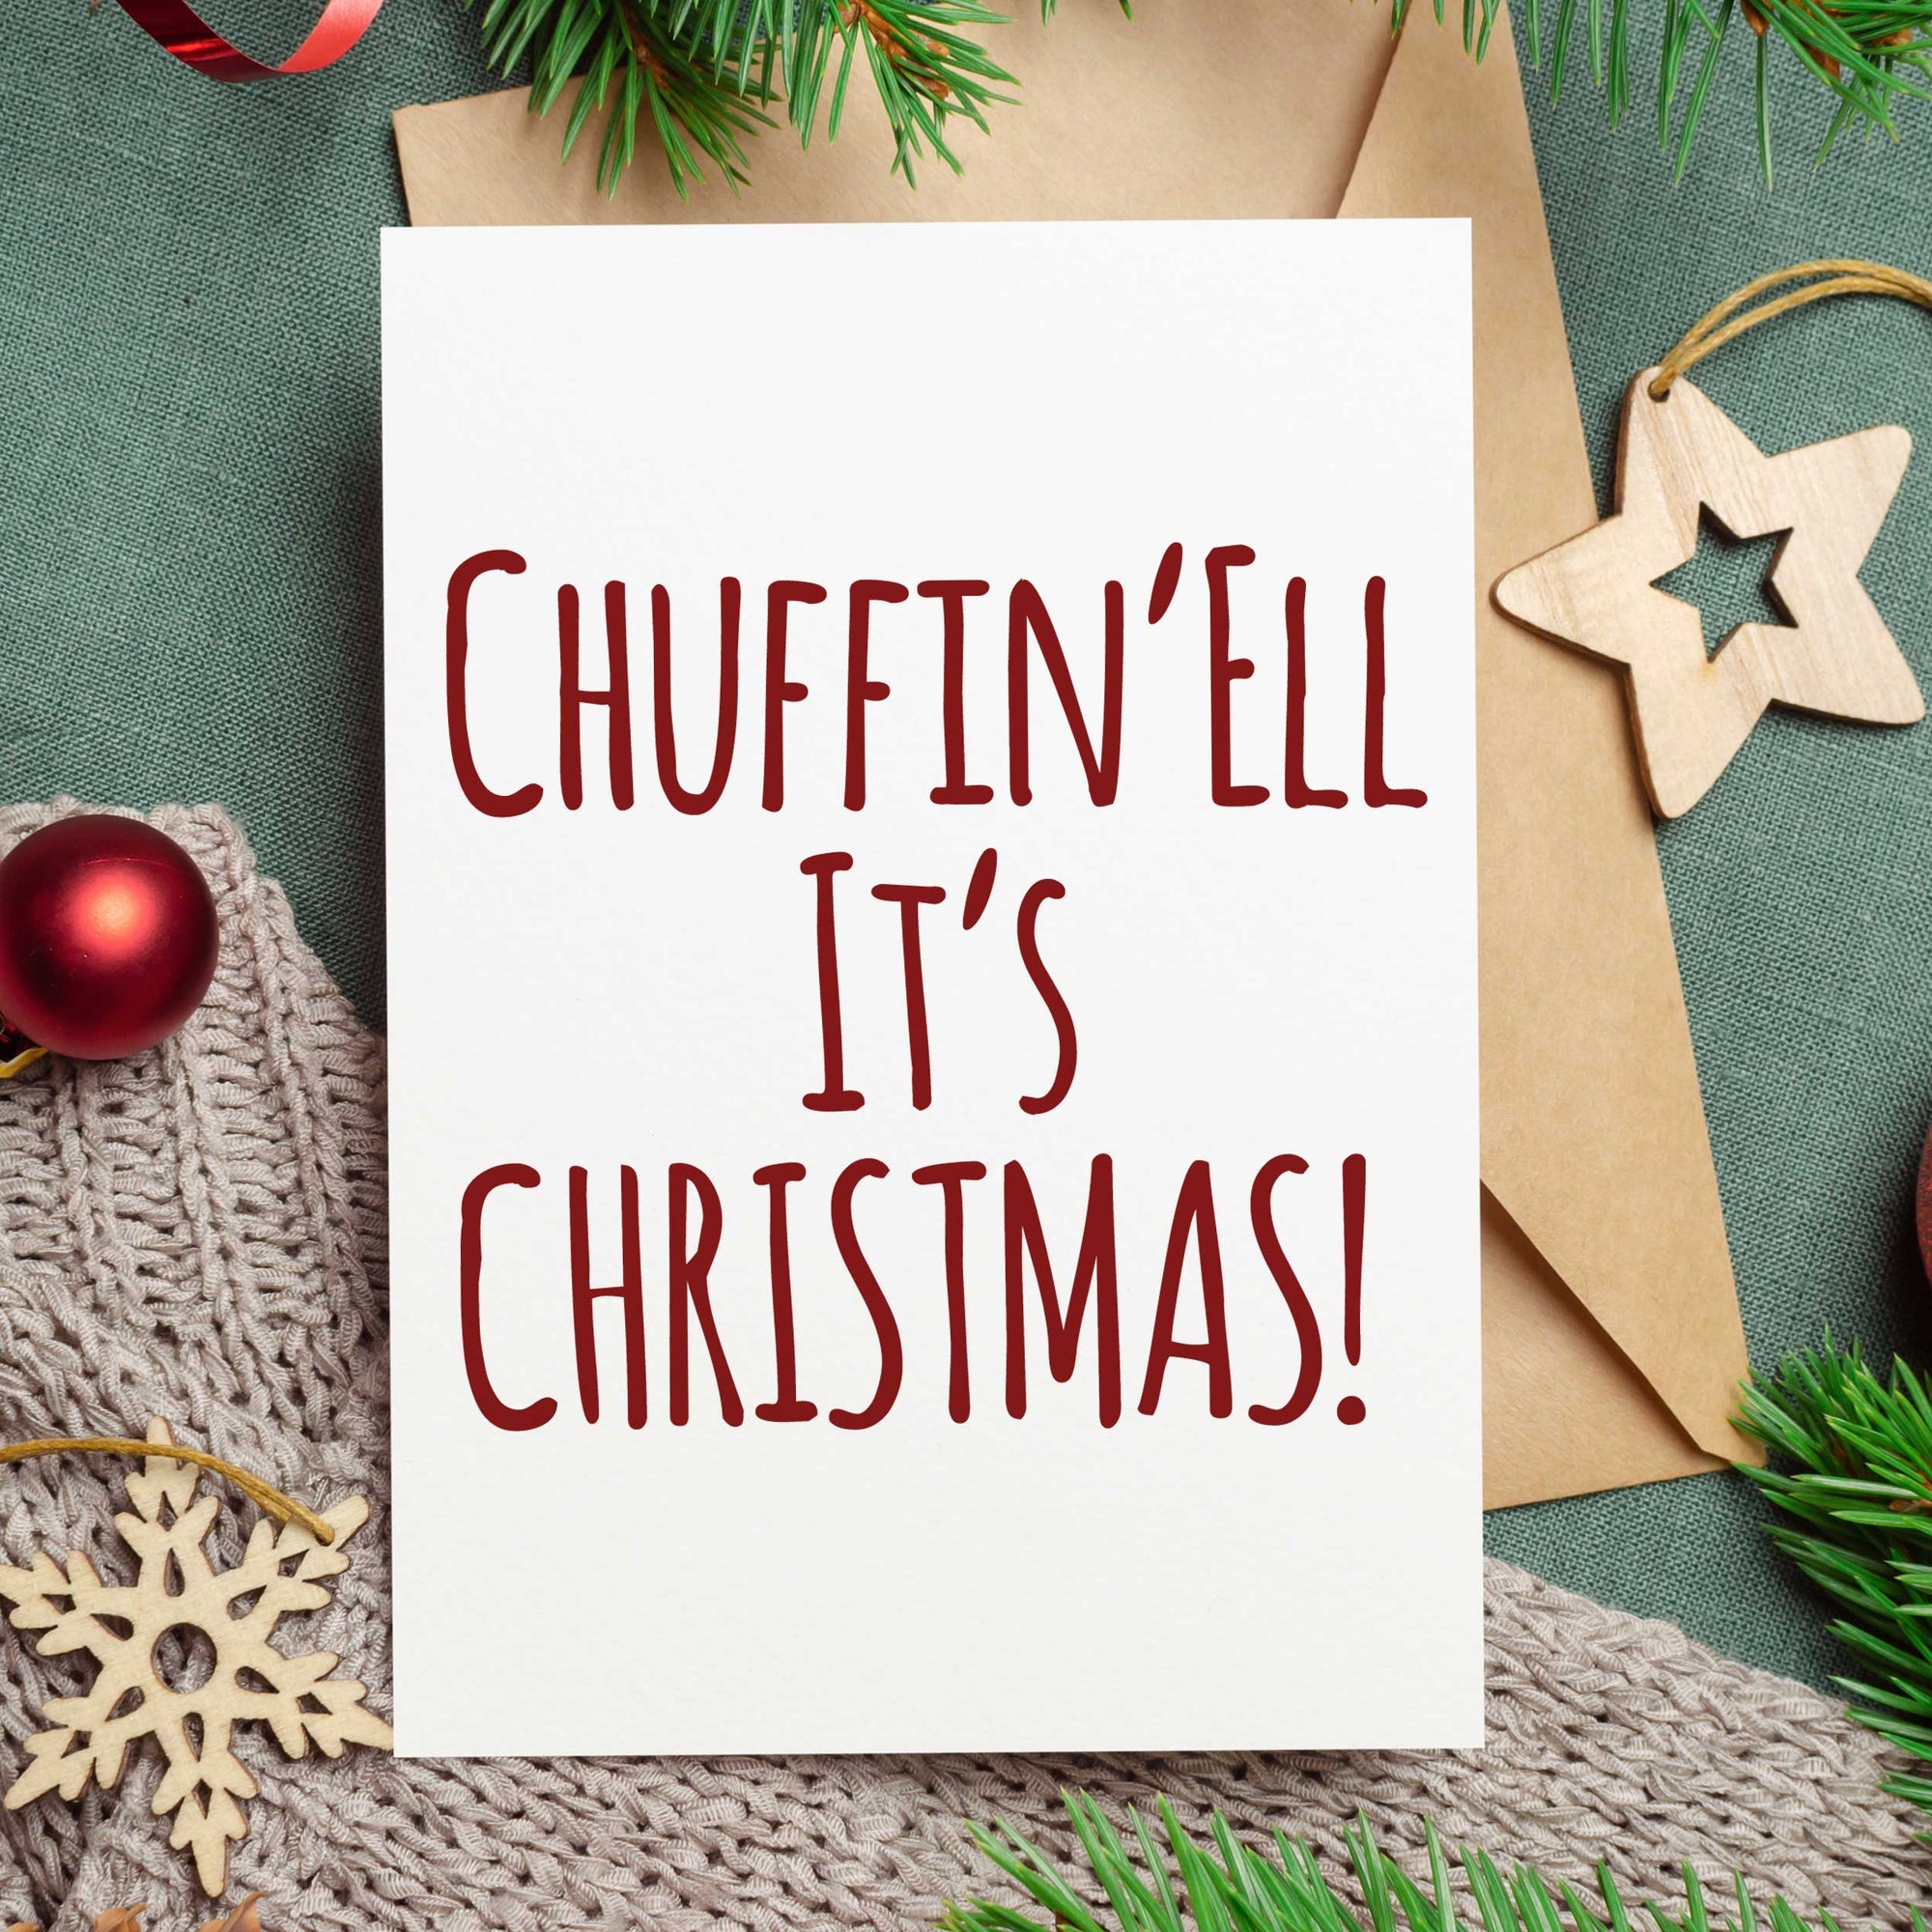 Chuffin'Ell It's Christmas Yorkshire Christmas Card